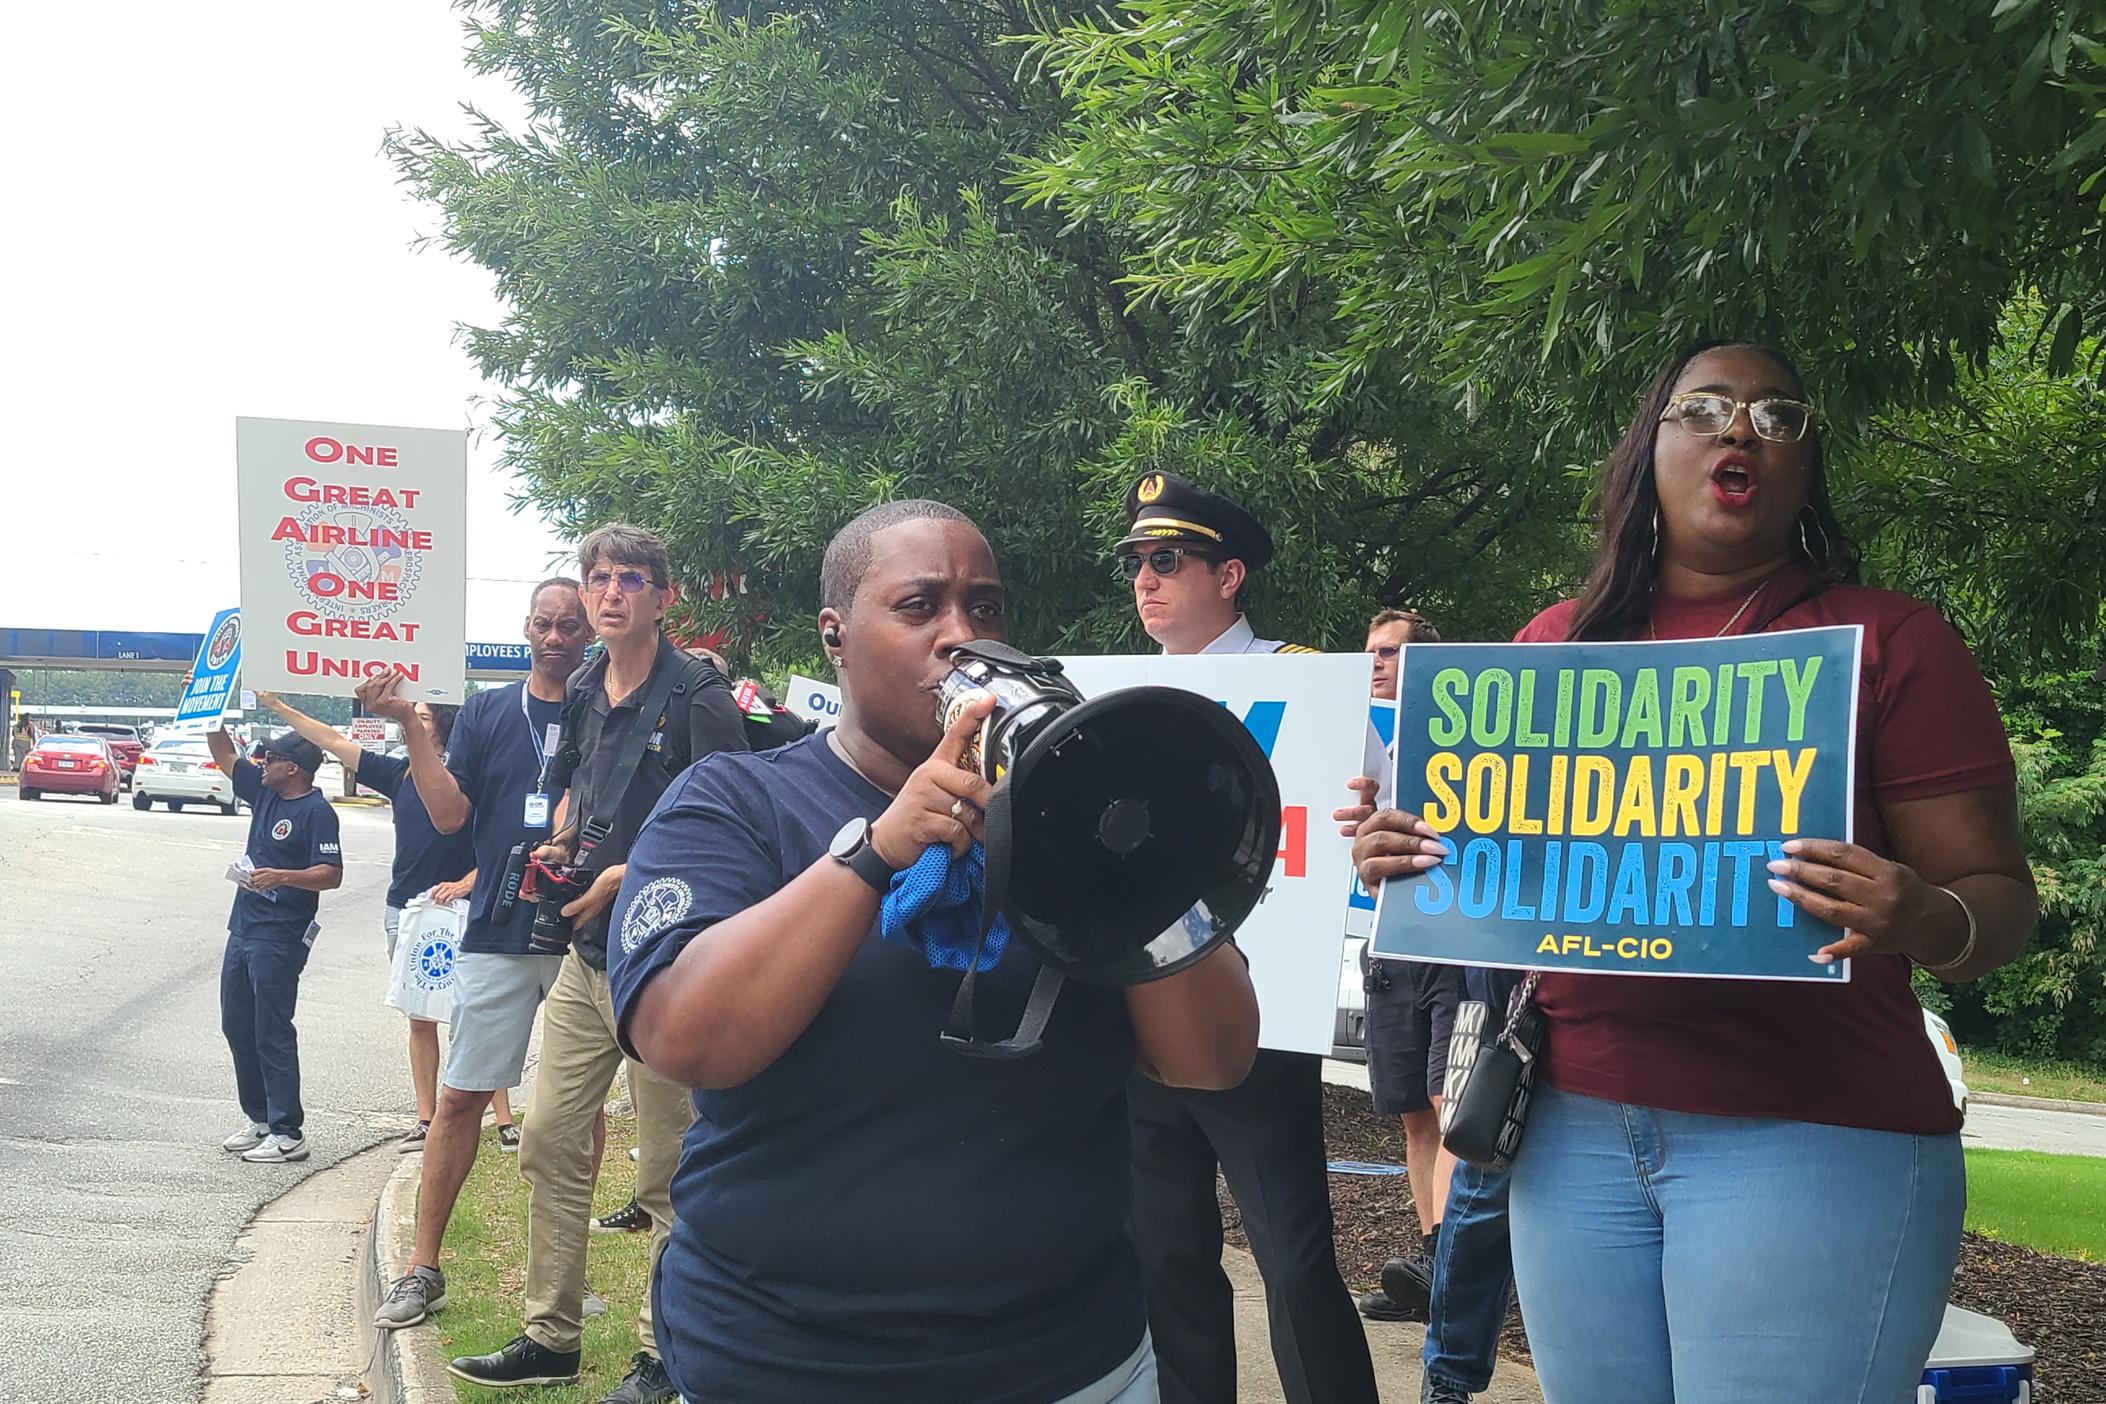 Avery hold a megaphone wearing a black shirt and several people stand behind her with signs saying " solidarity" and "one great airline, one great union"